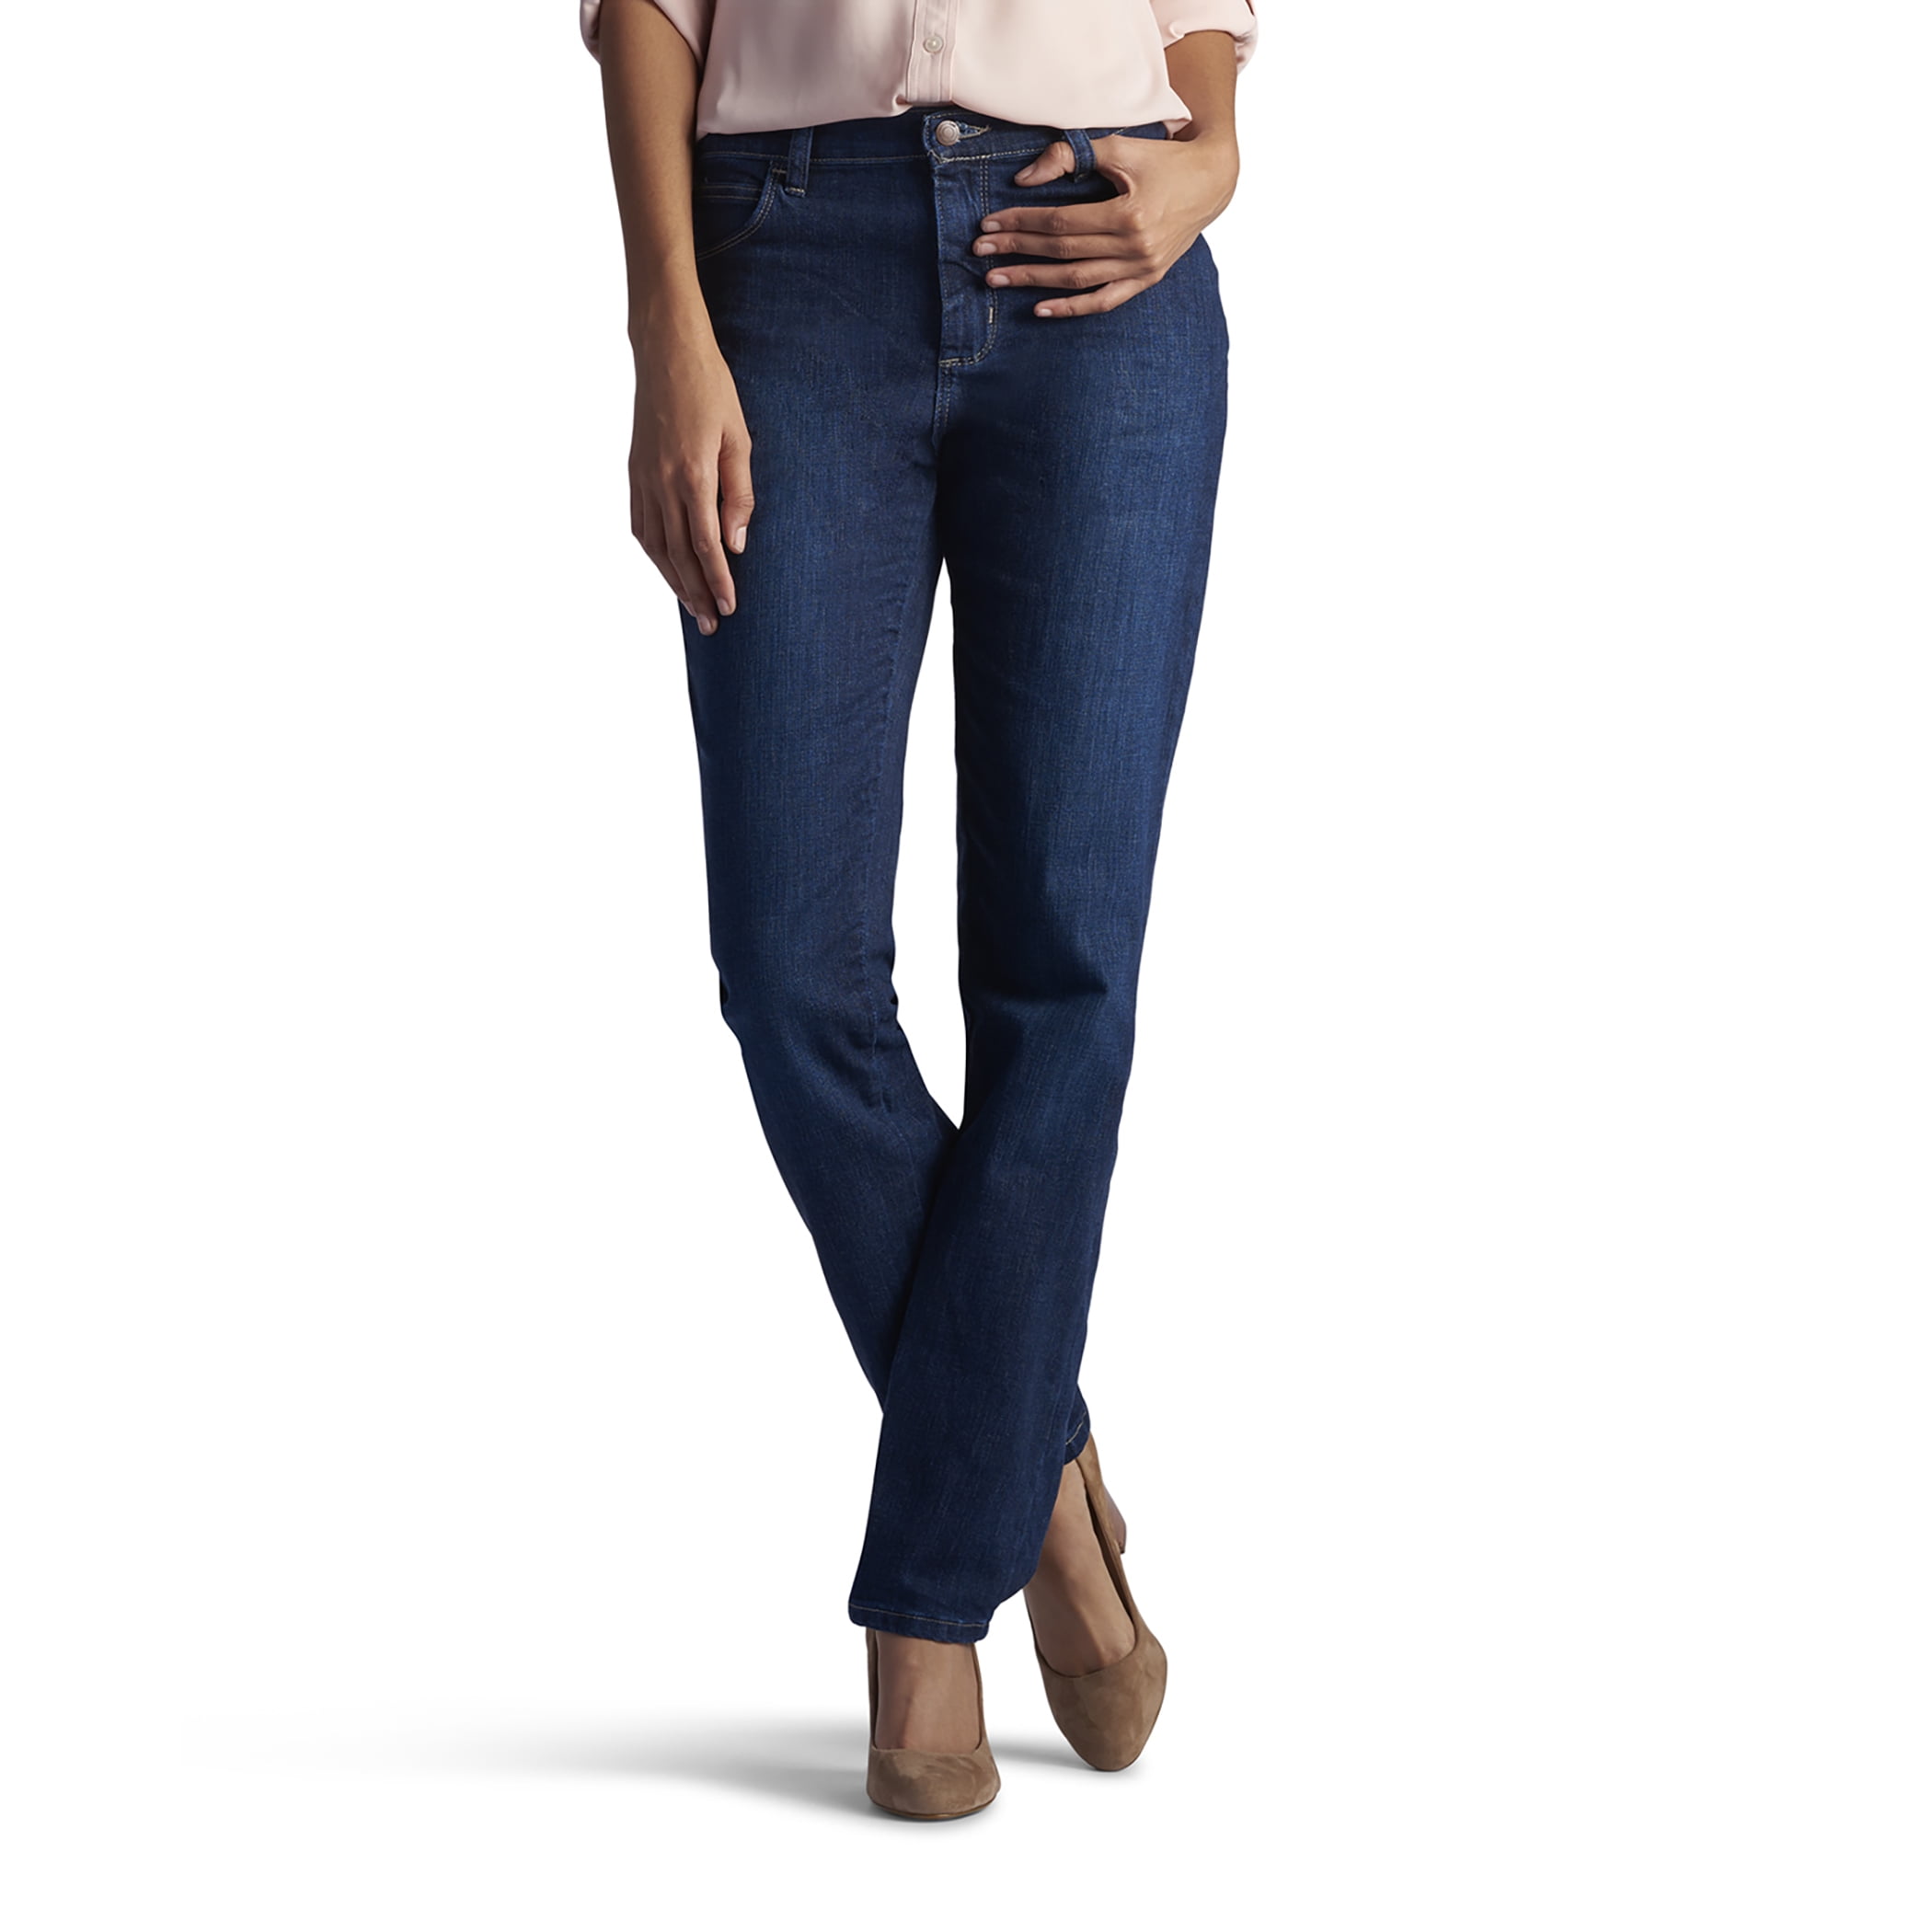 women's relaxed fit straight leg jeans